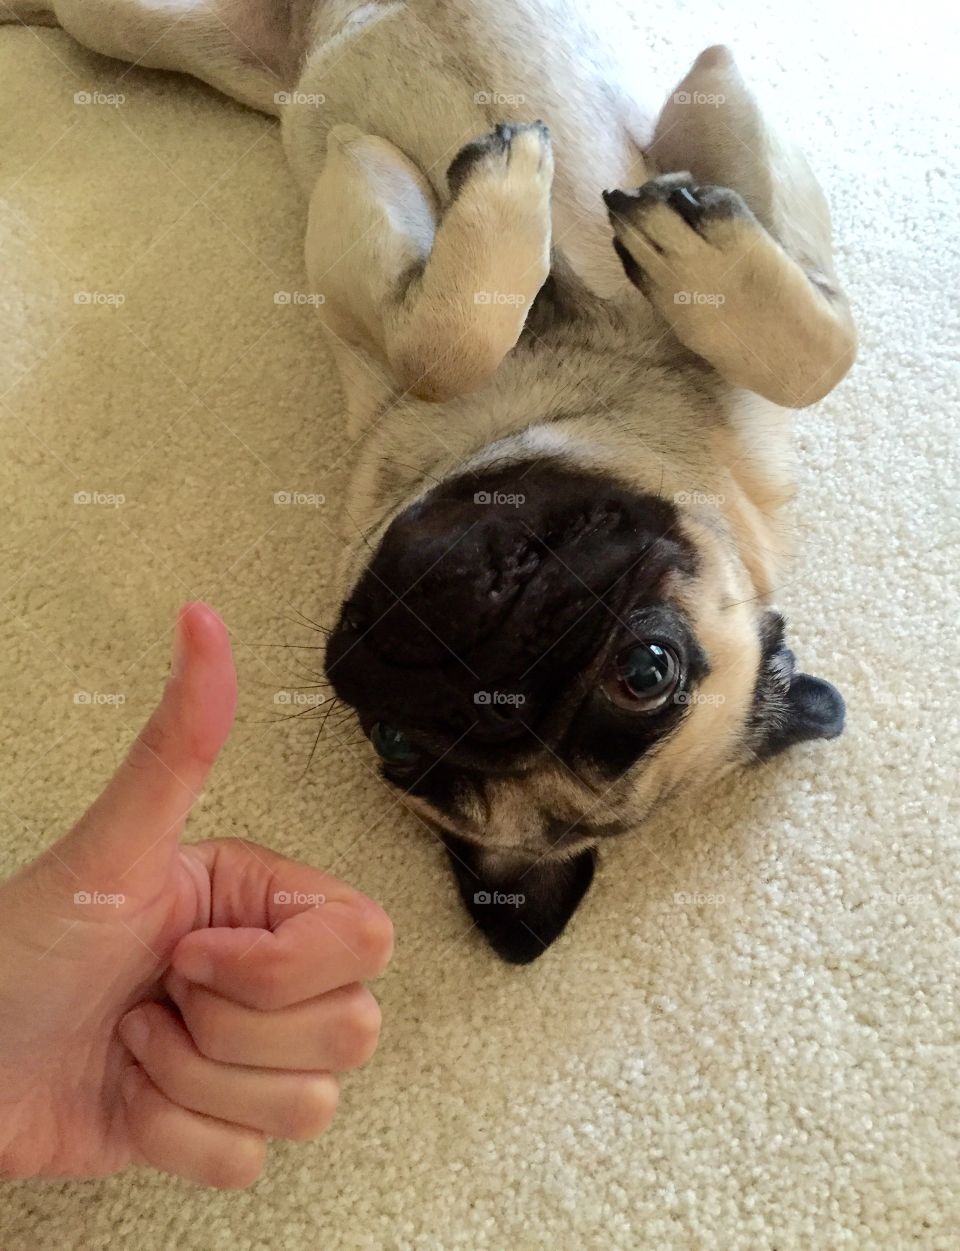 Belly rubs are a thumbs up for this pug!